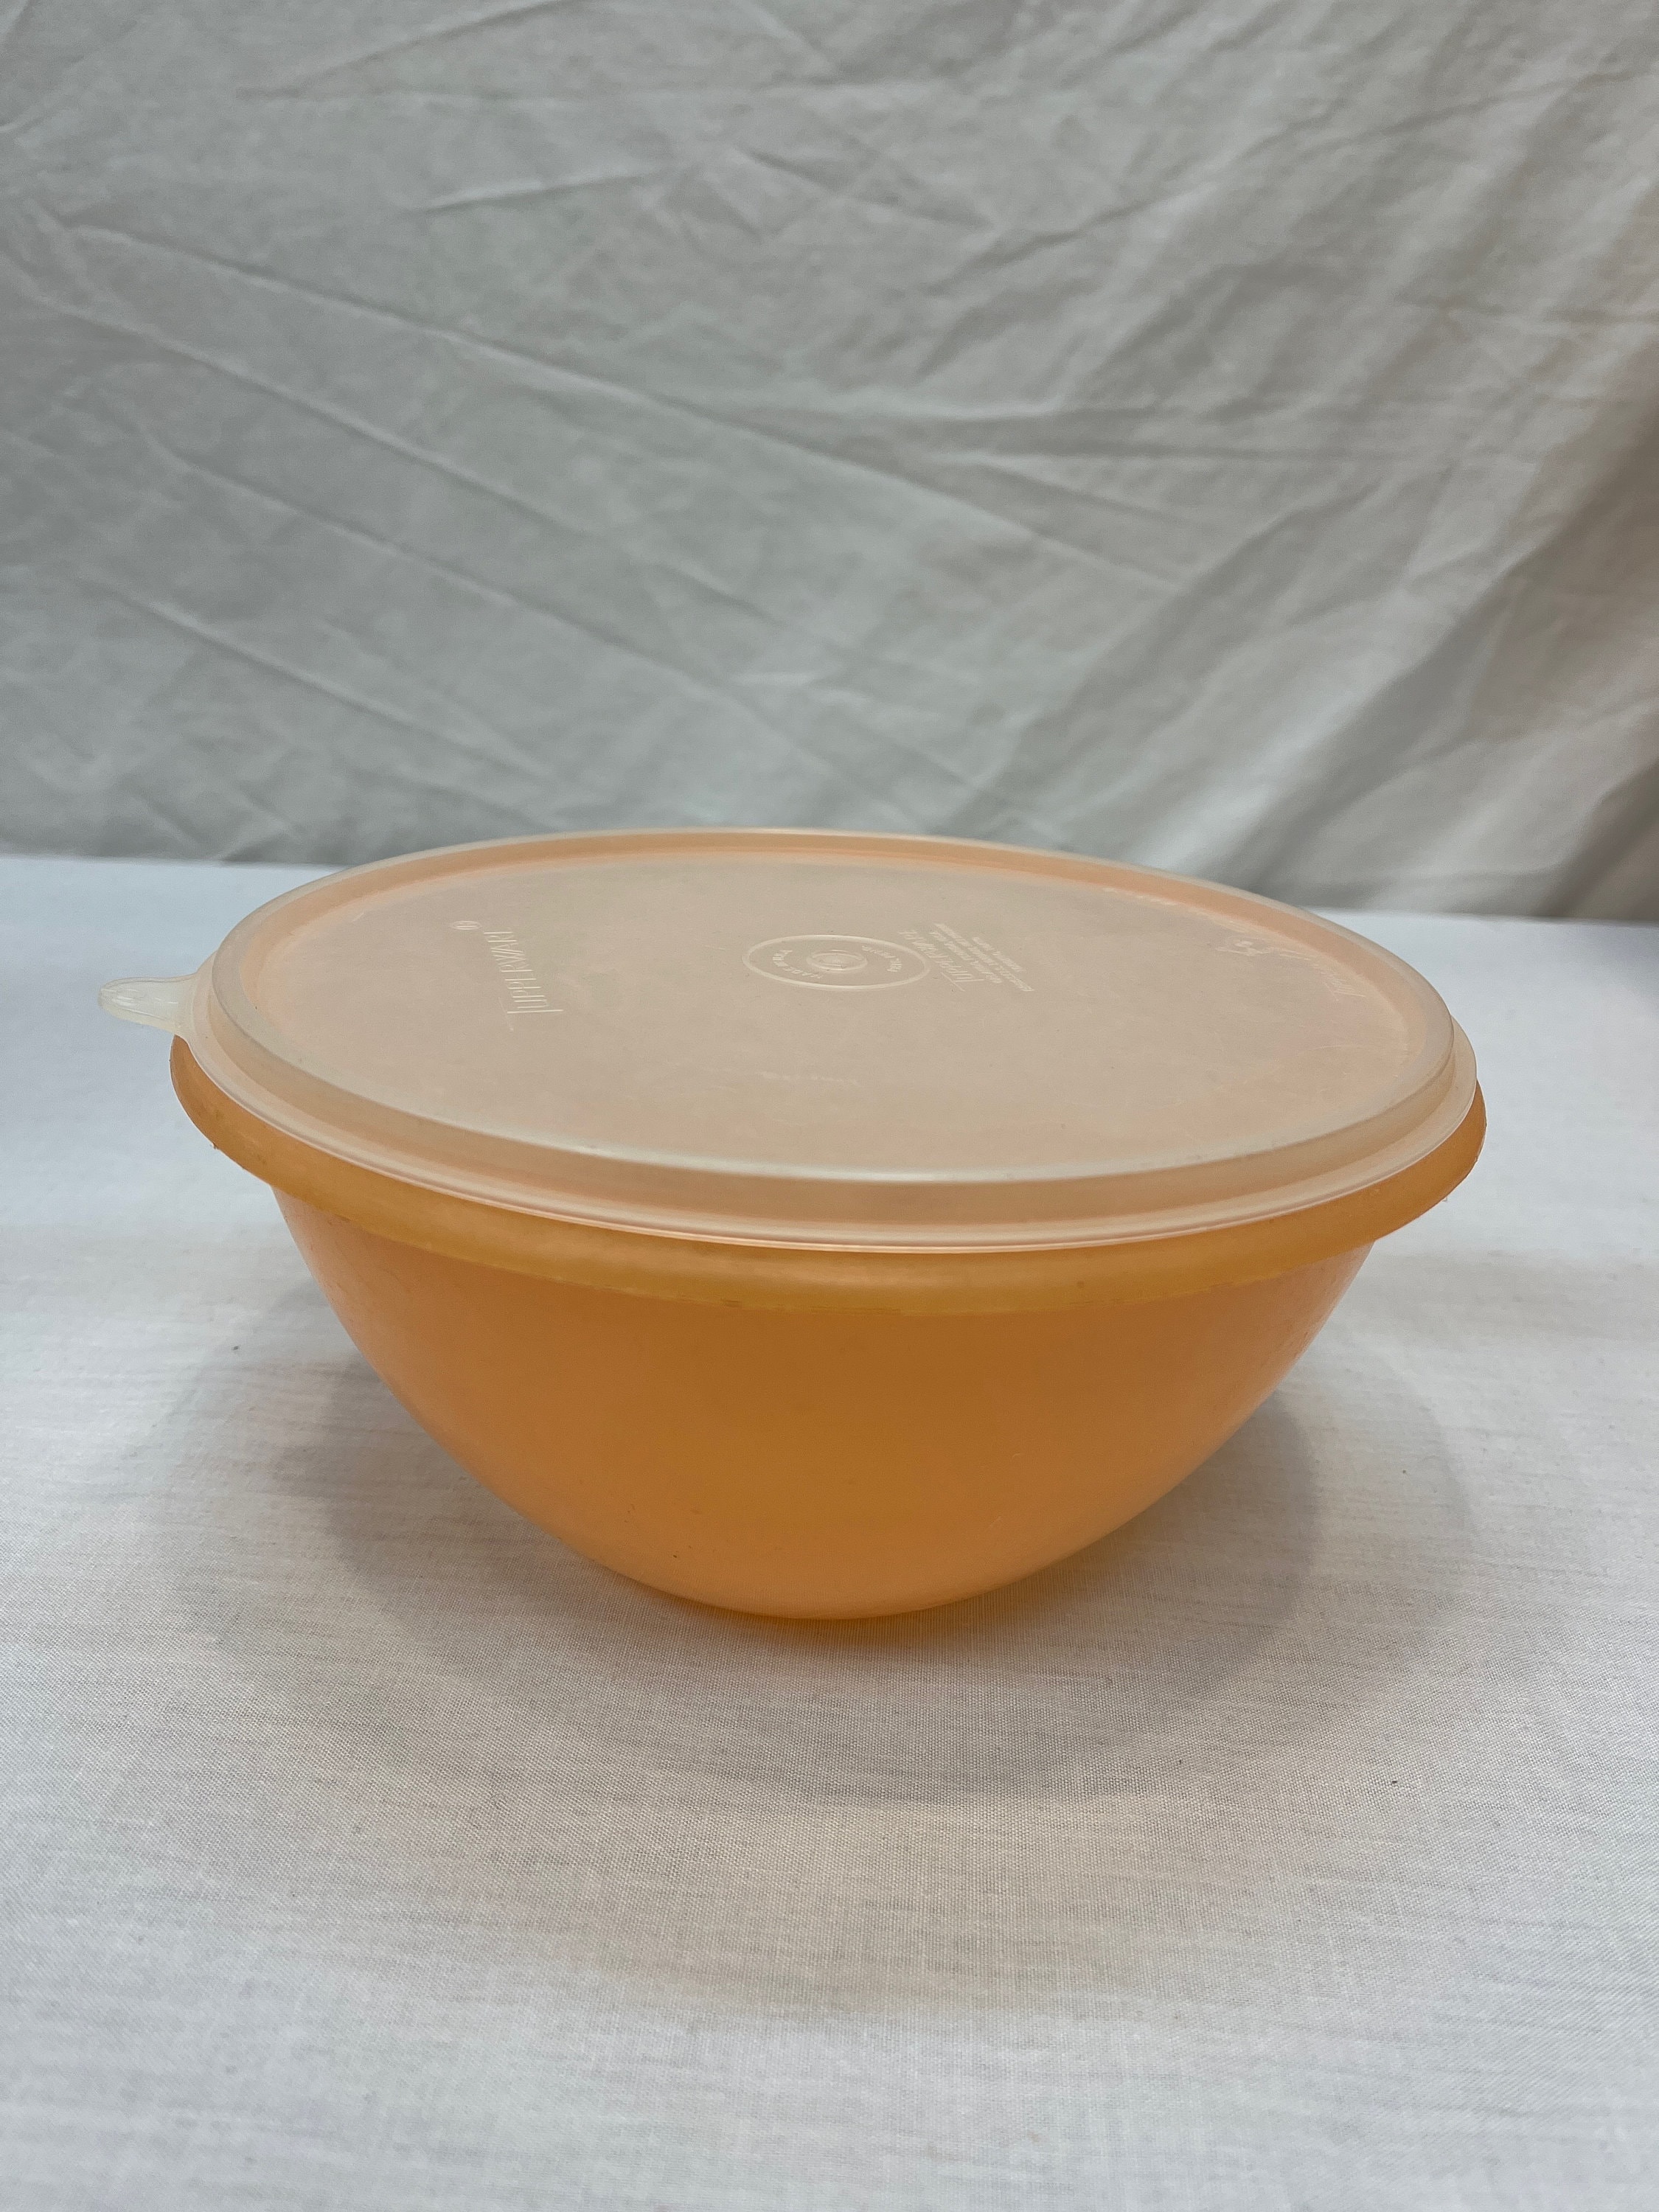 Tupperware speckled mixing bowls With pink lids 270-3 & 271-9